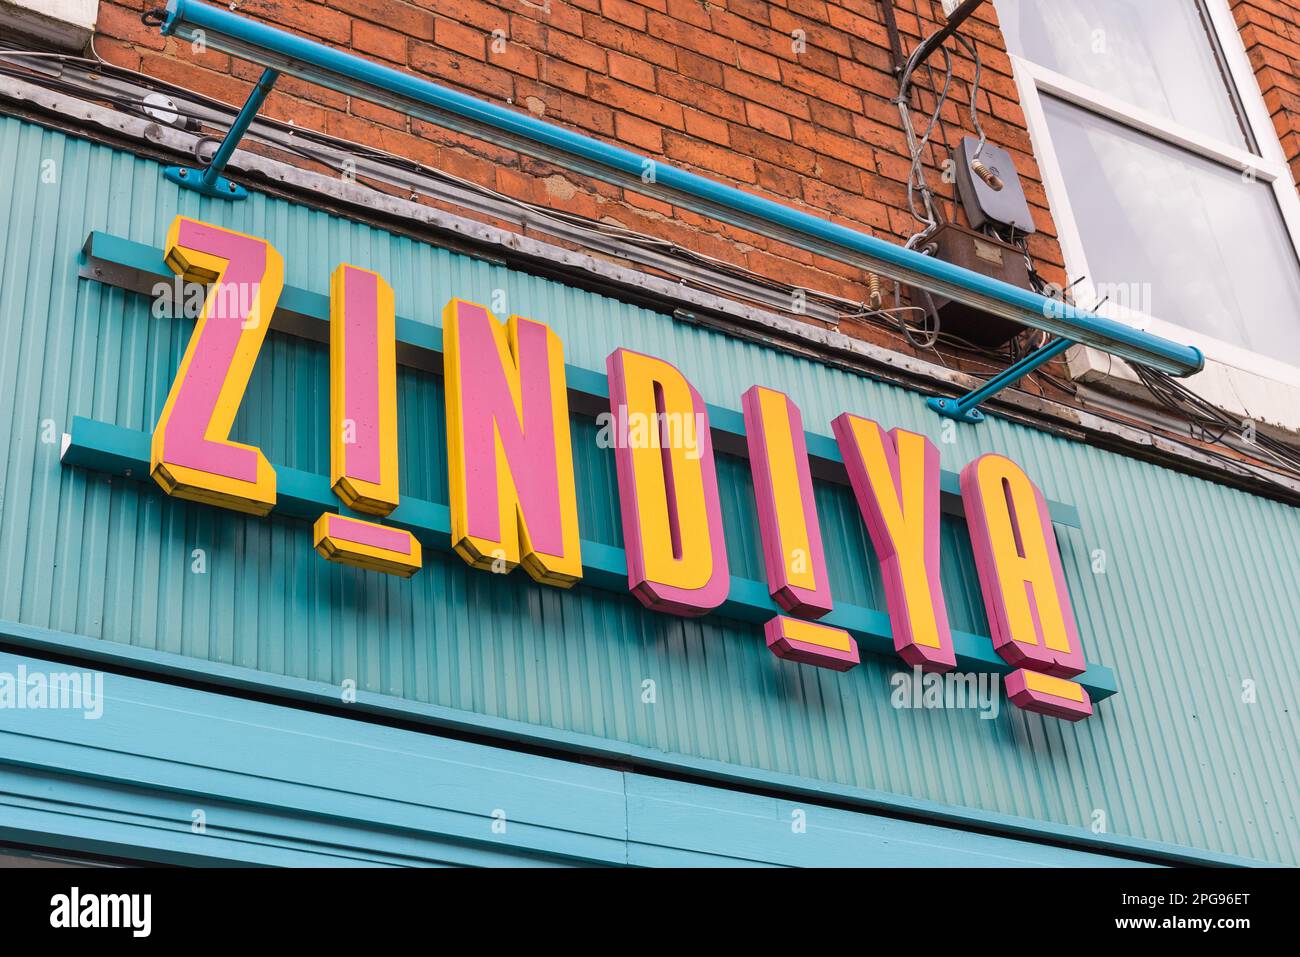 Zindiya indian restaurant serving grills and street food dishes in Moseley, Birmingham Stock Photo